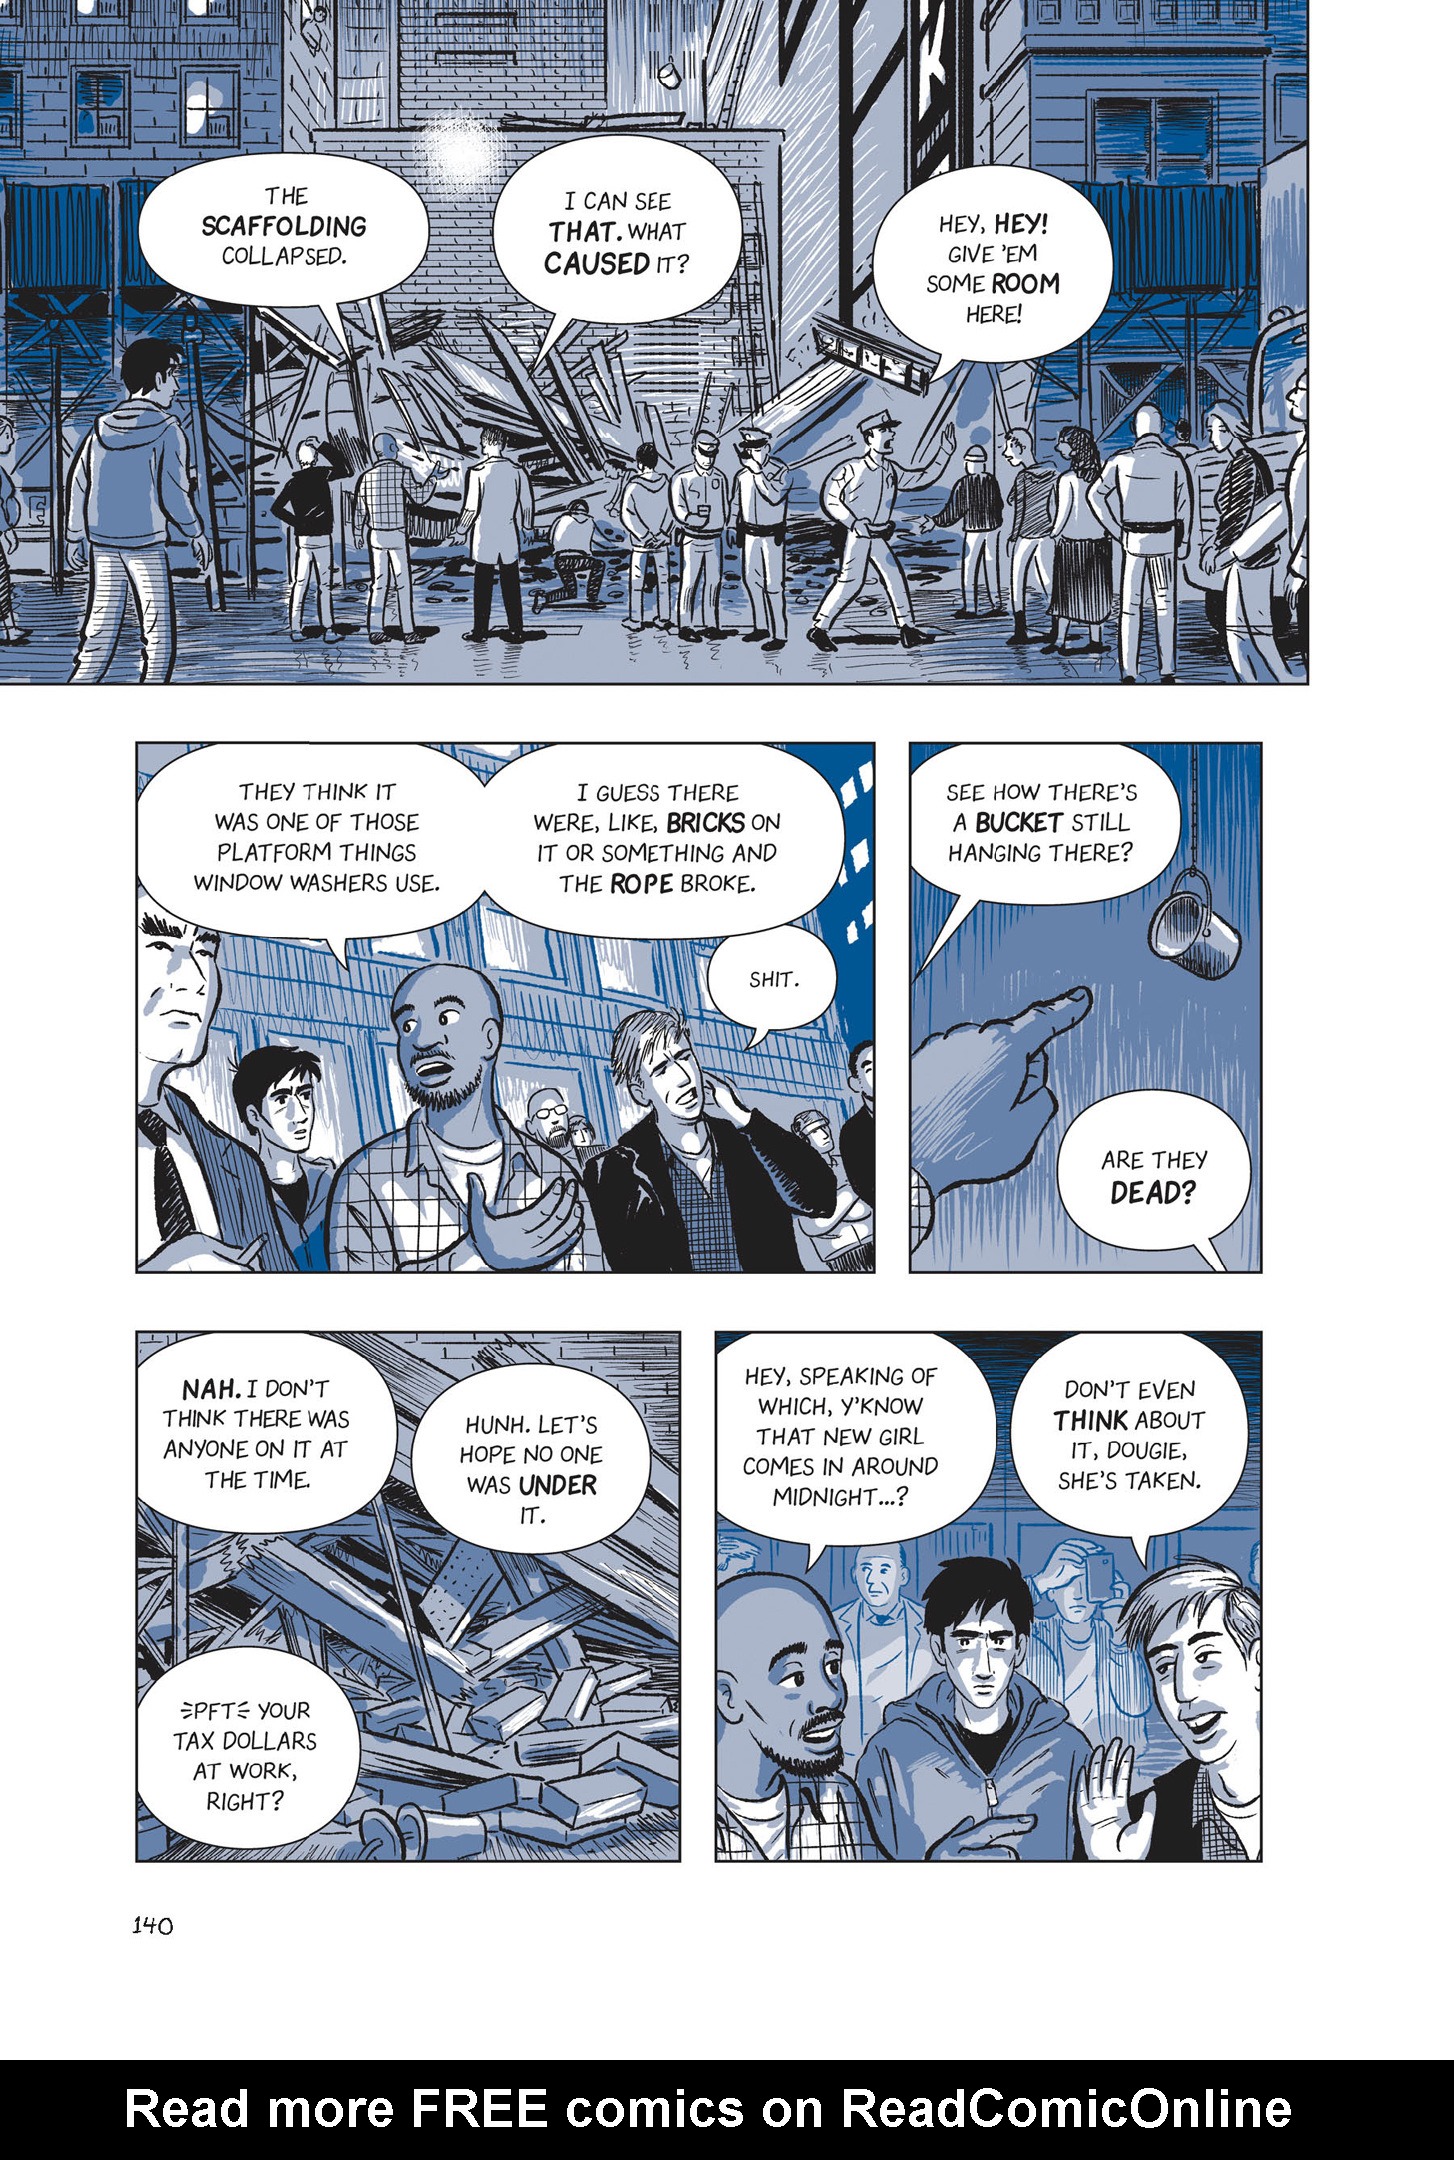 Read online The Sculptor comic -  Issue # Part 2 - 10